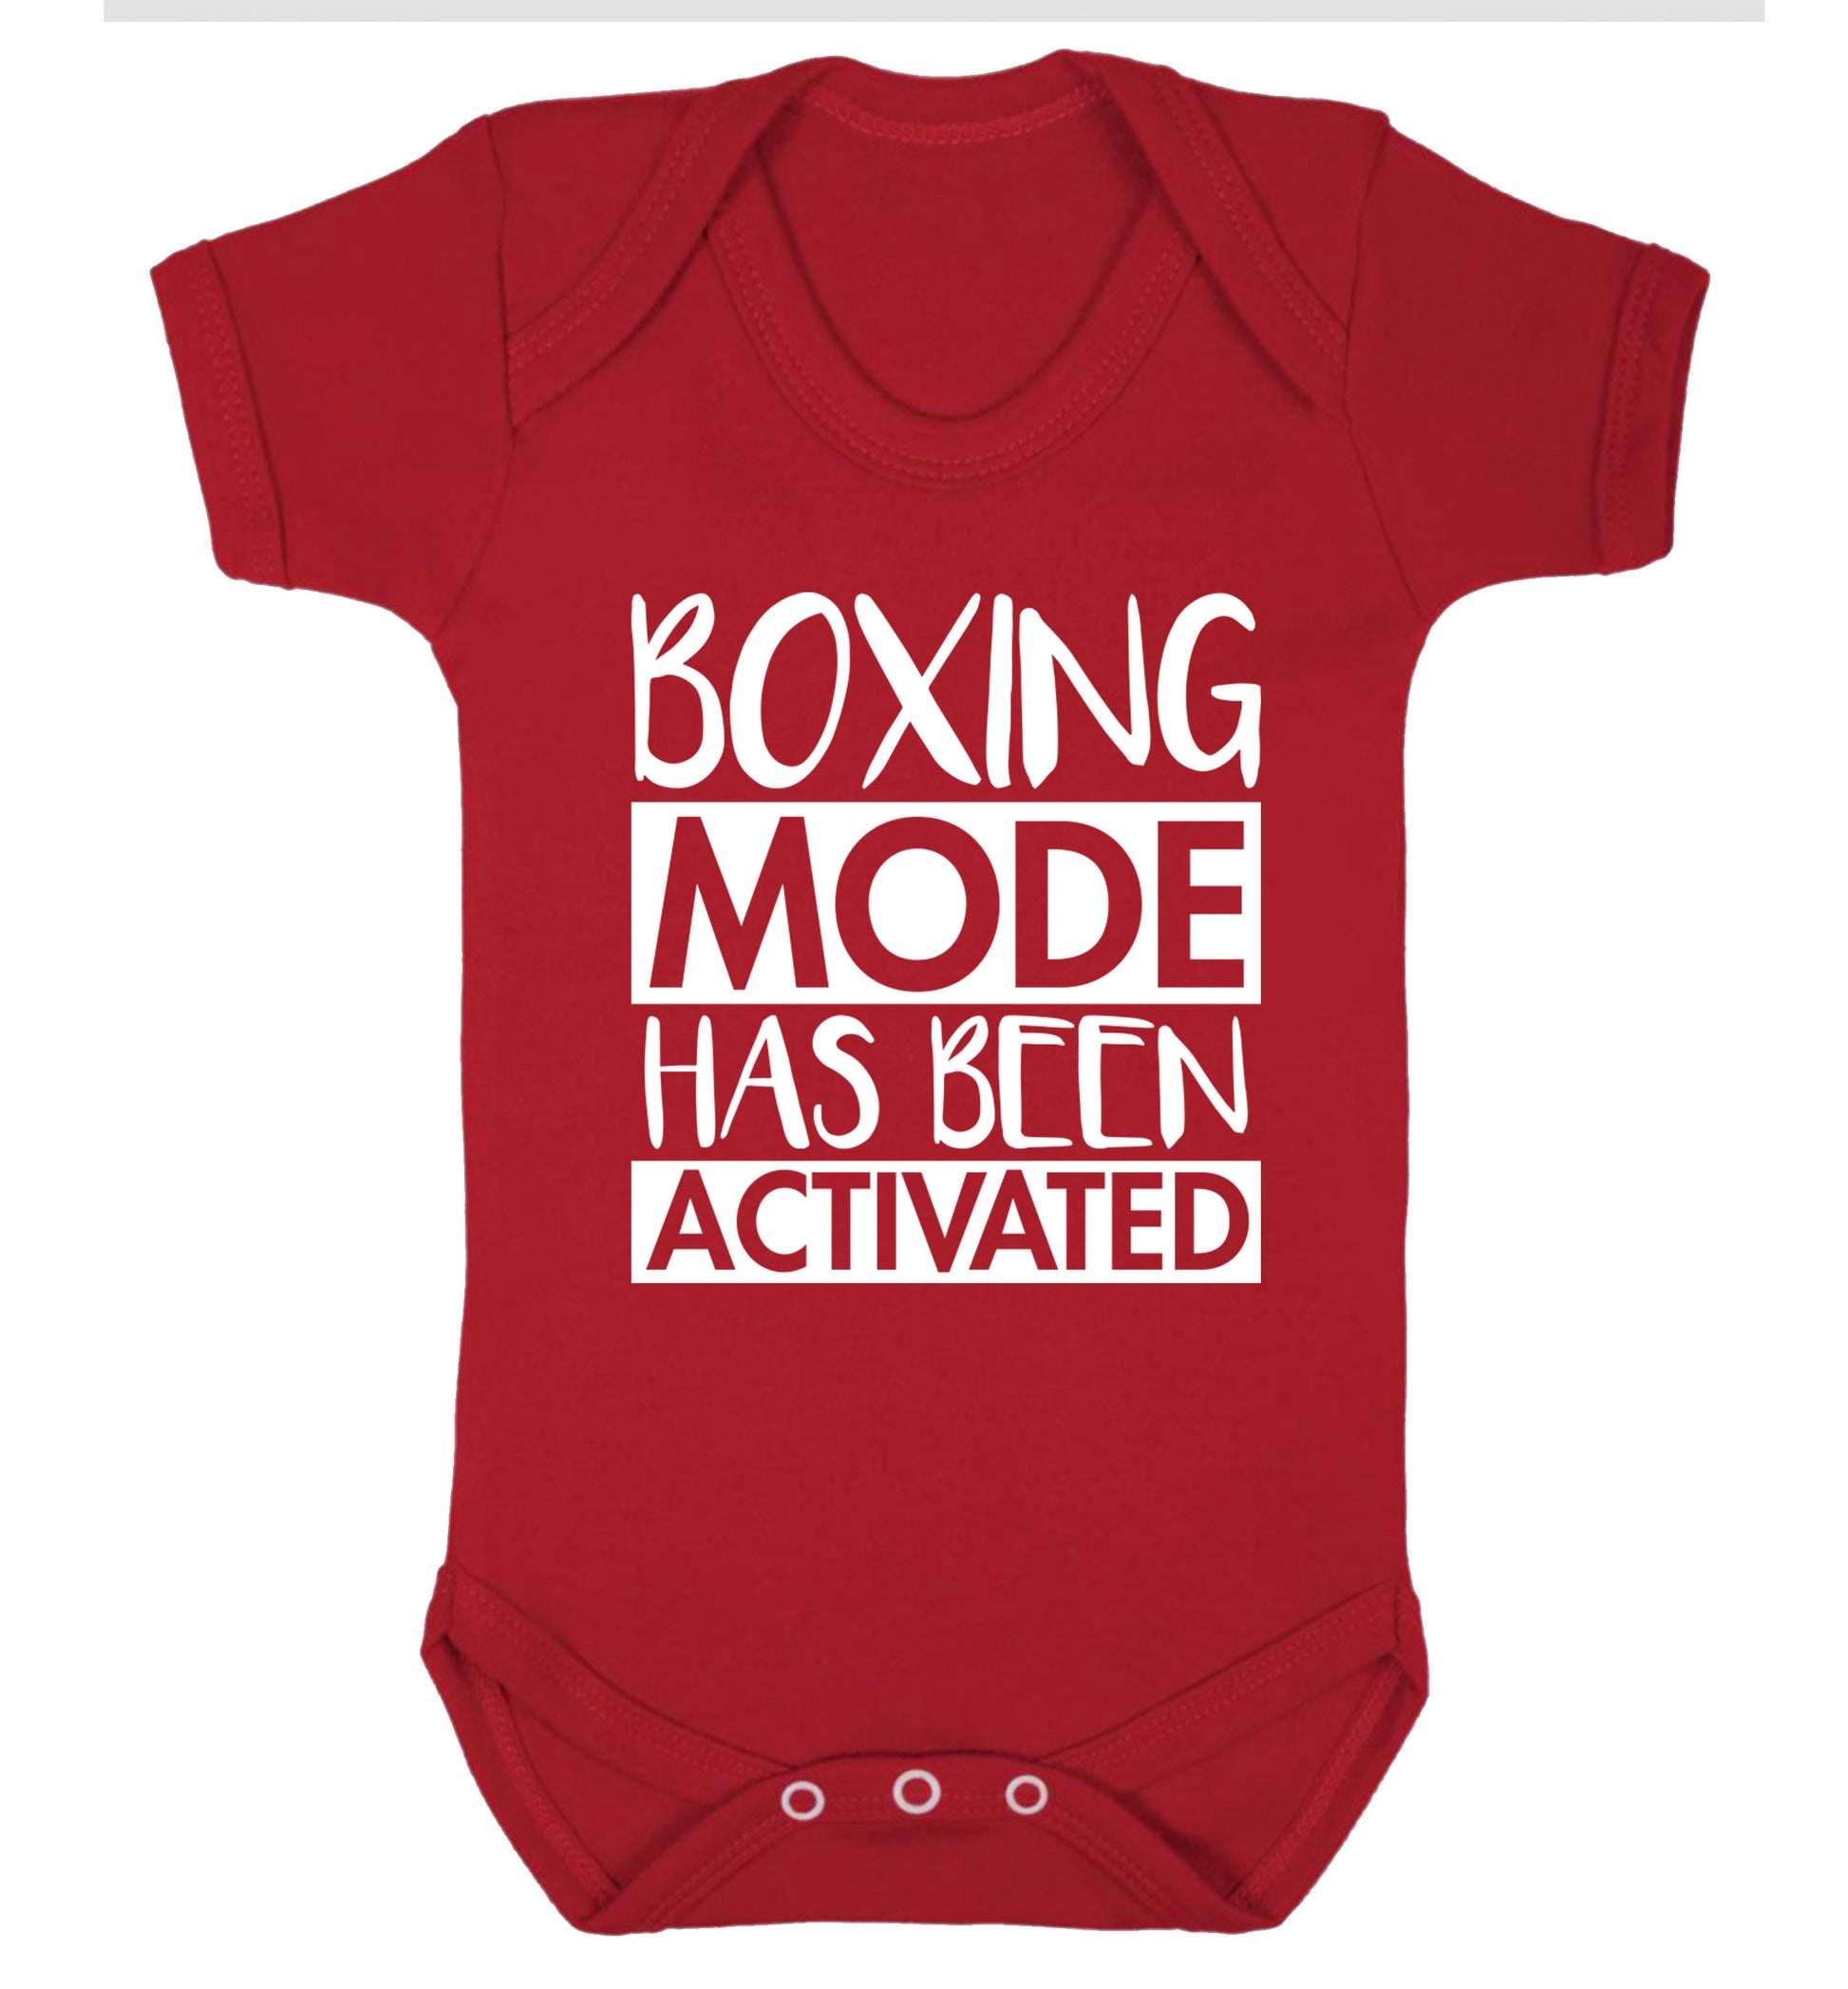 Boxing mode activated Baby Vest red 18-24 months